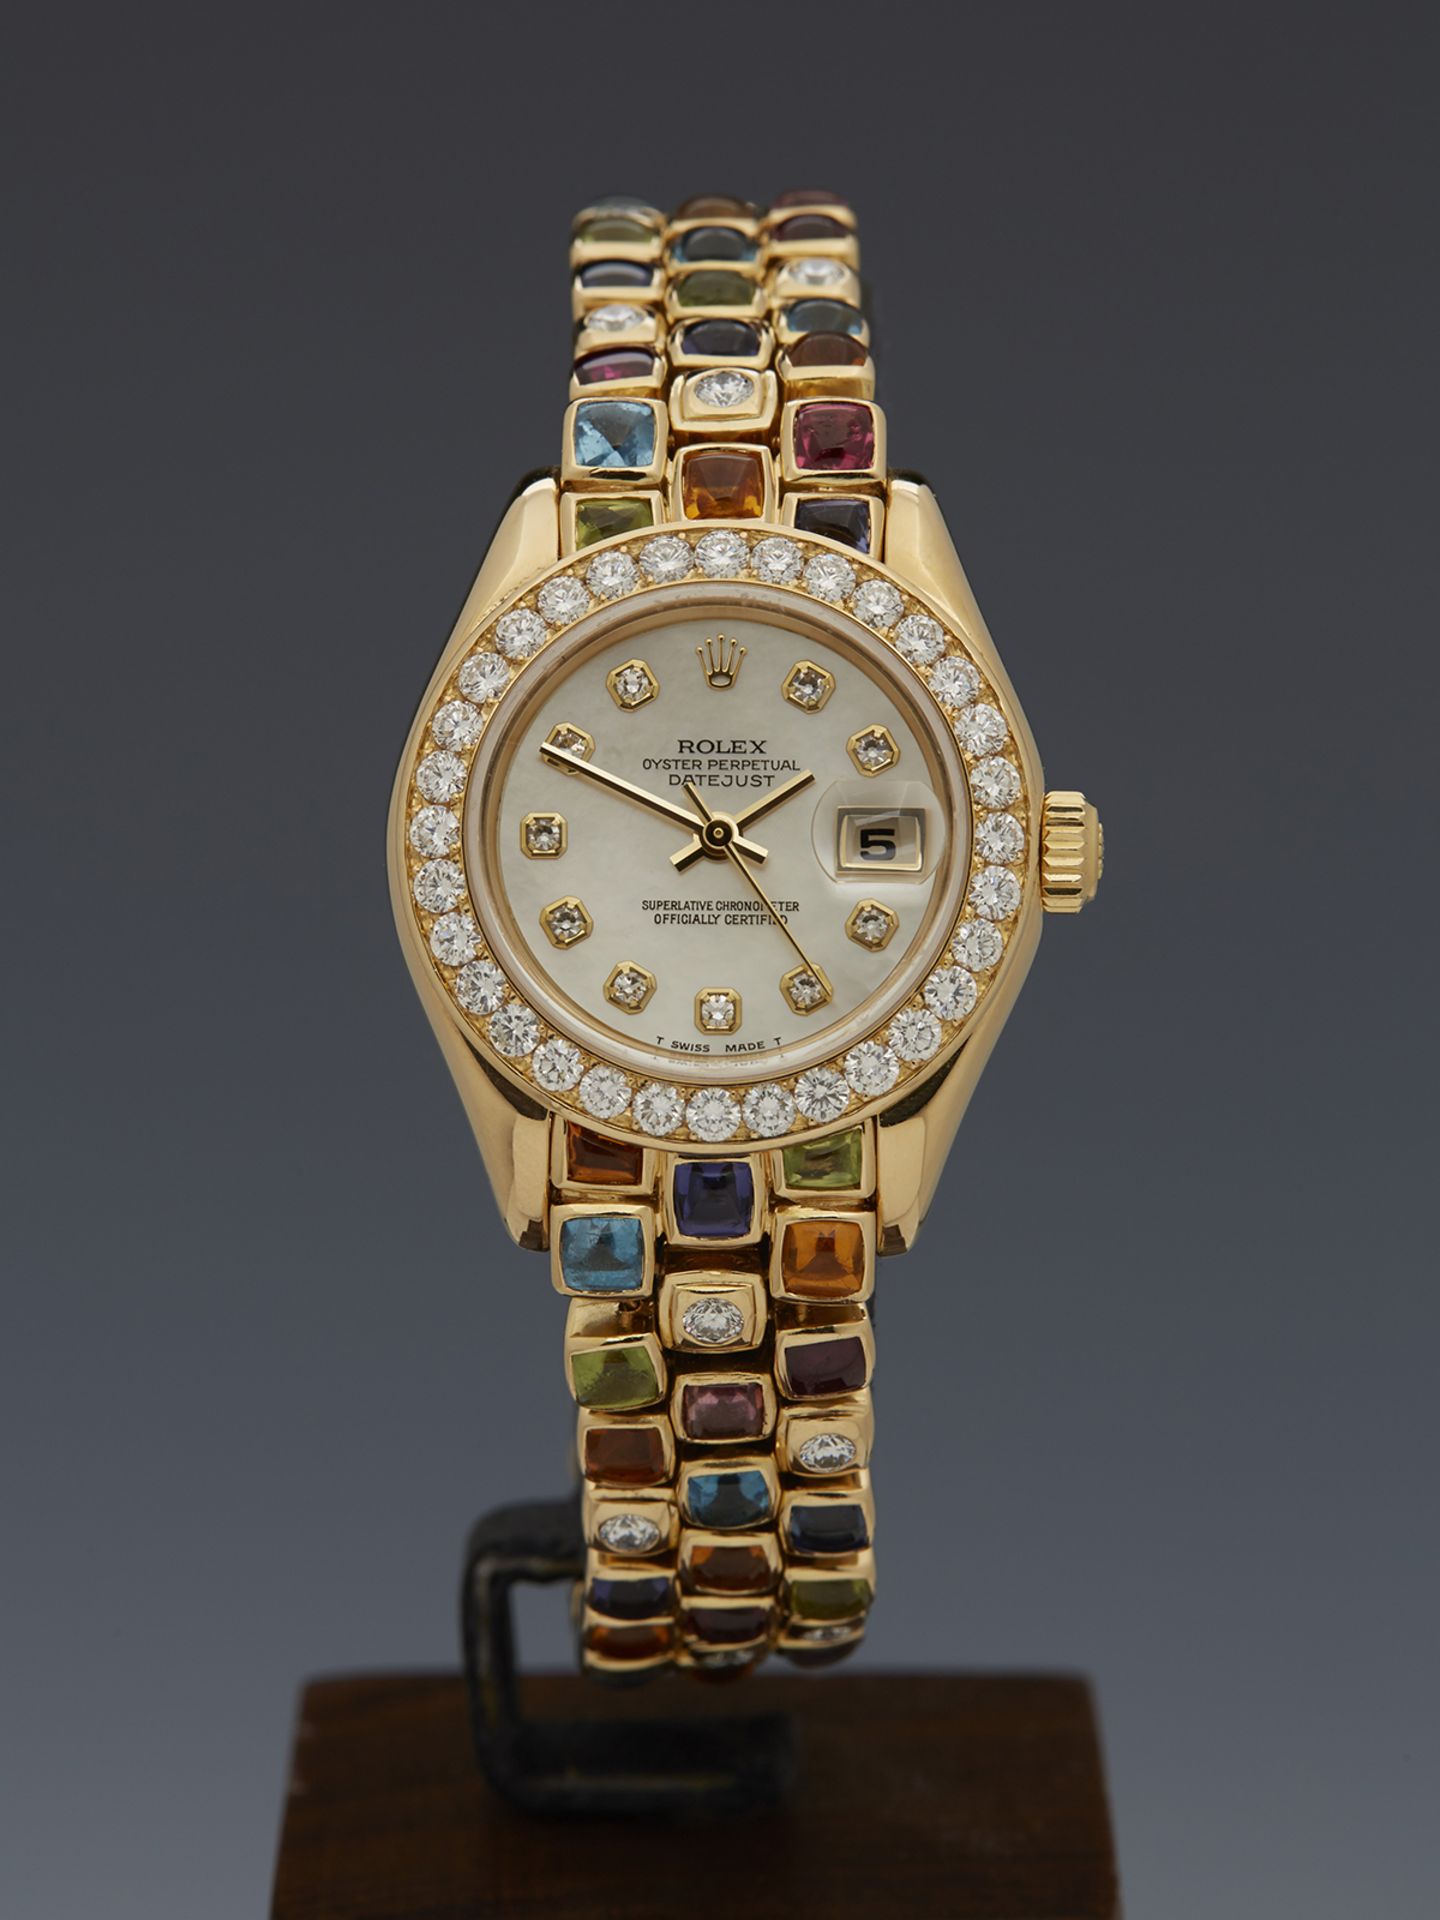 Rolex, Pearlmaster 69298 Diamonds & Precious Gems Limited Edition for the Dubai Royal Family - Image 3 of 11